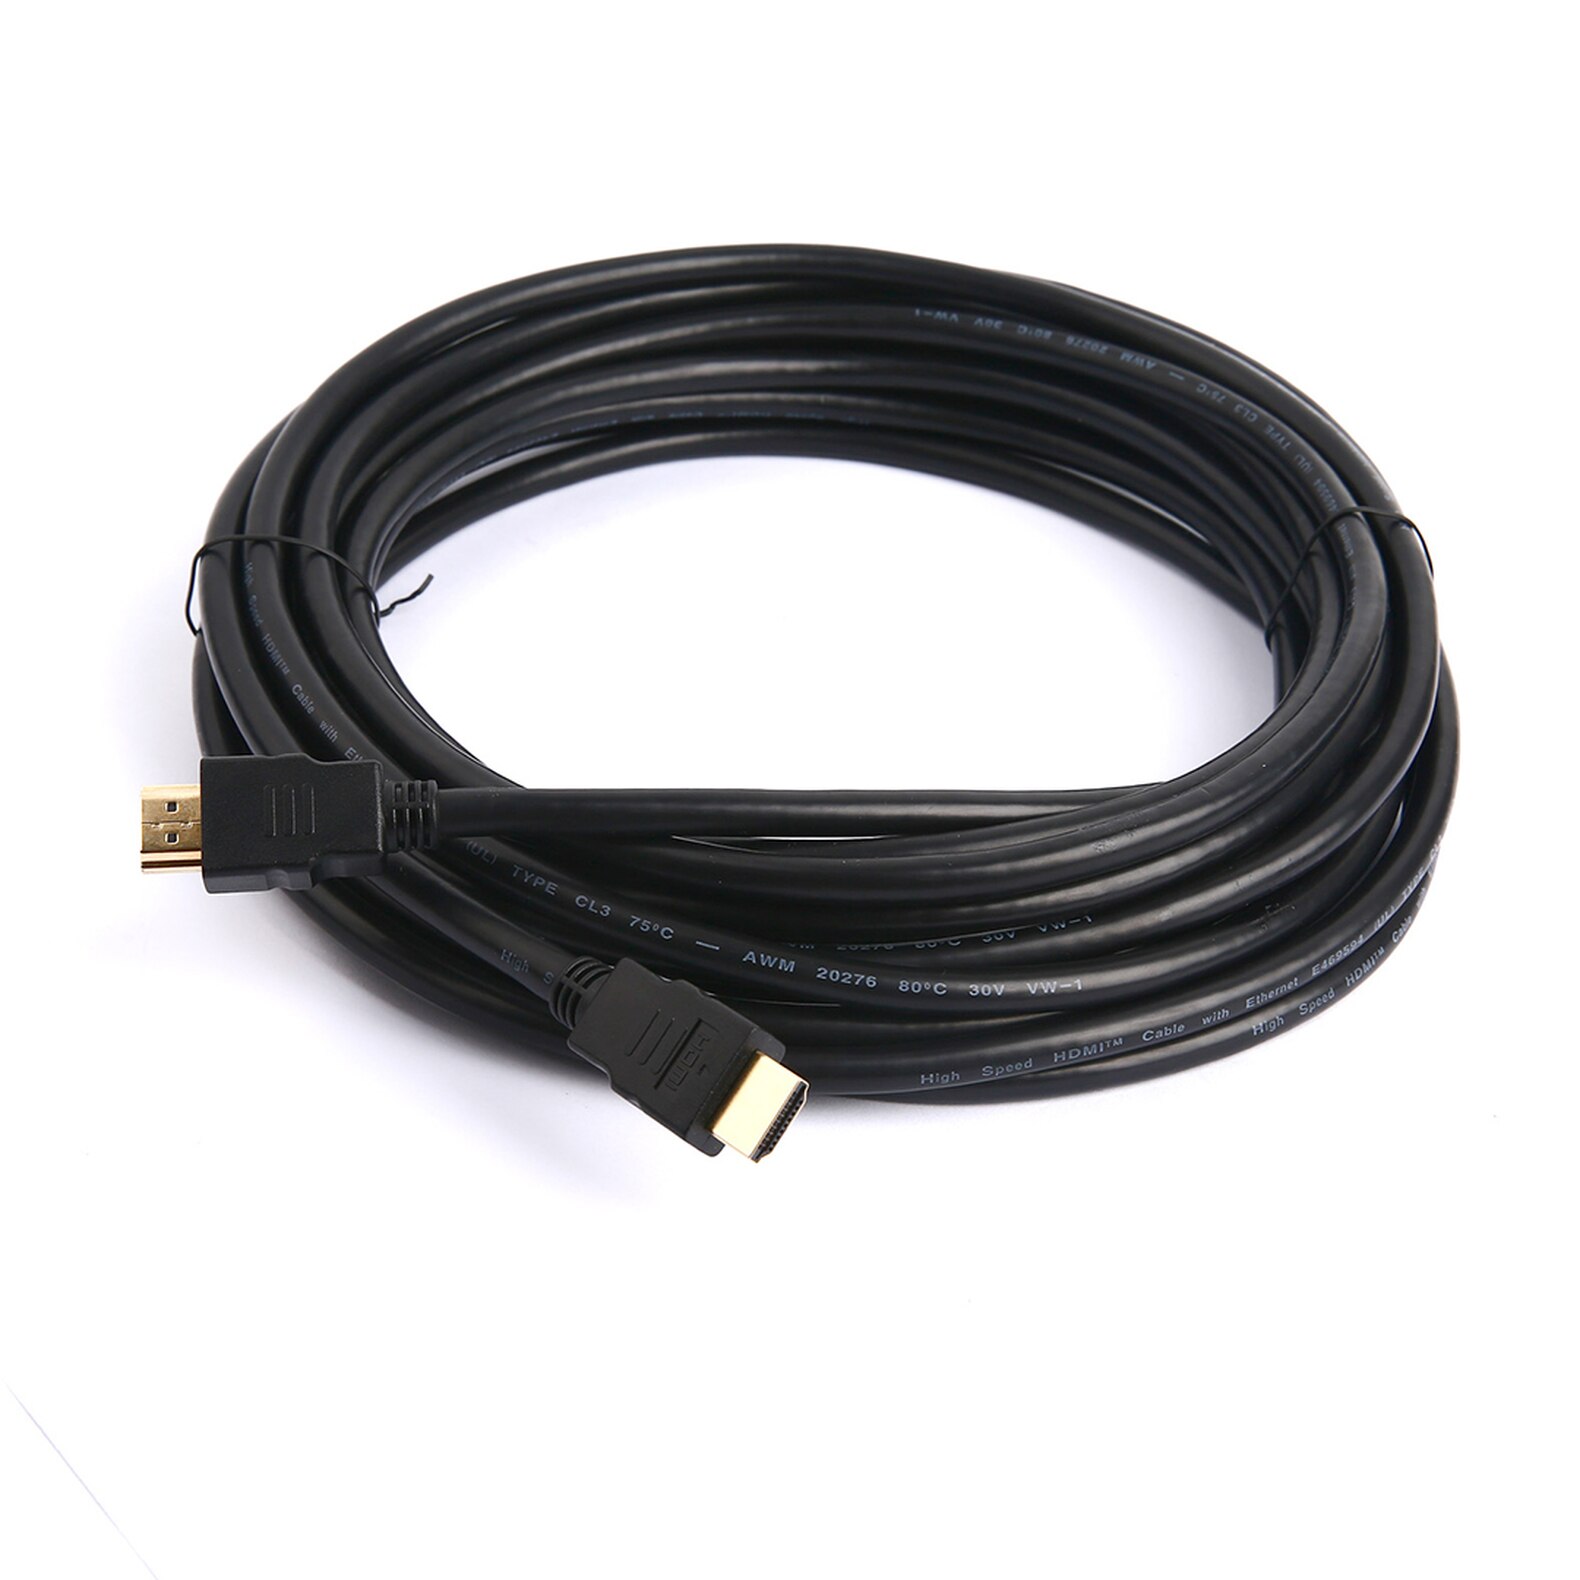 25 foot HDMI Cable